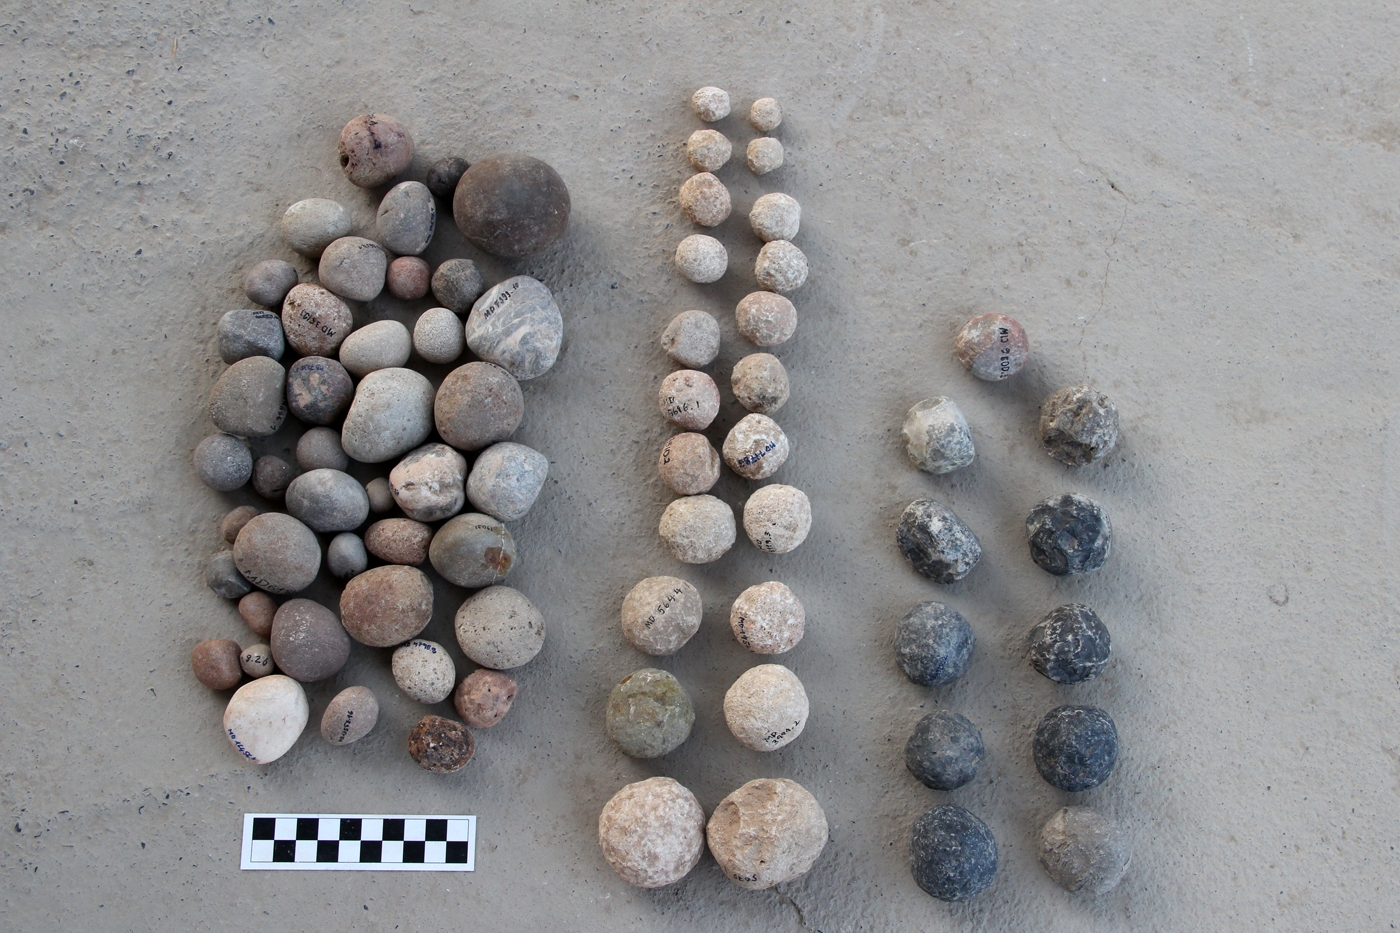 Stone balls (center and right), with naturally rounded stones (left) as a comparison.